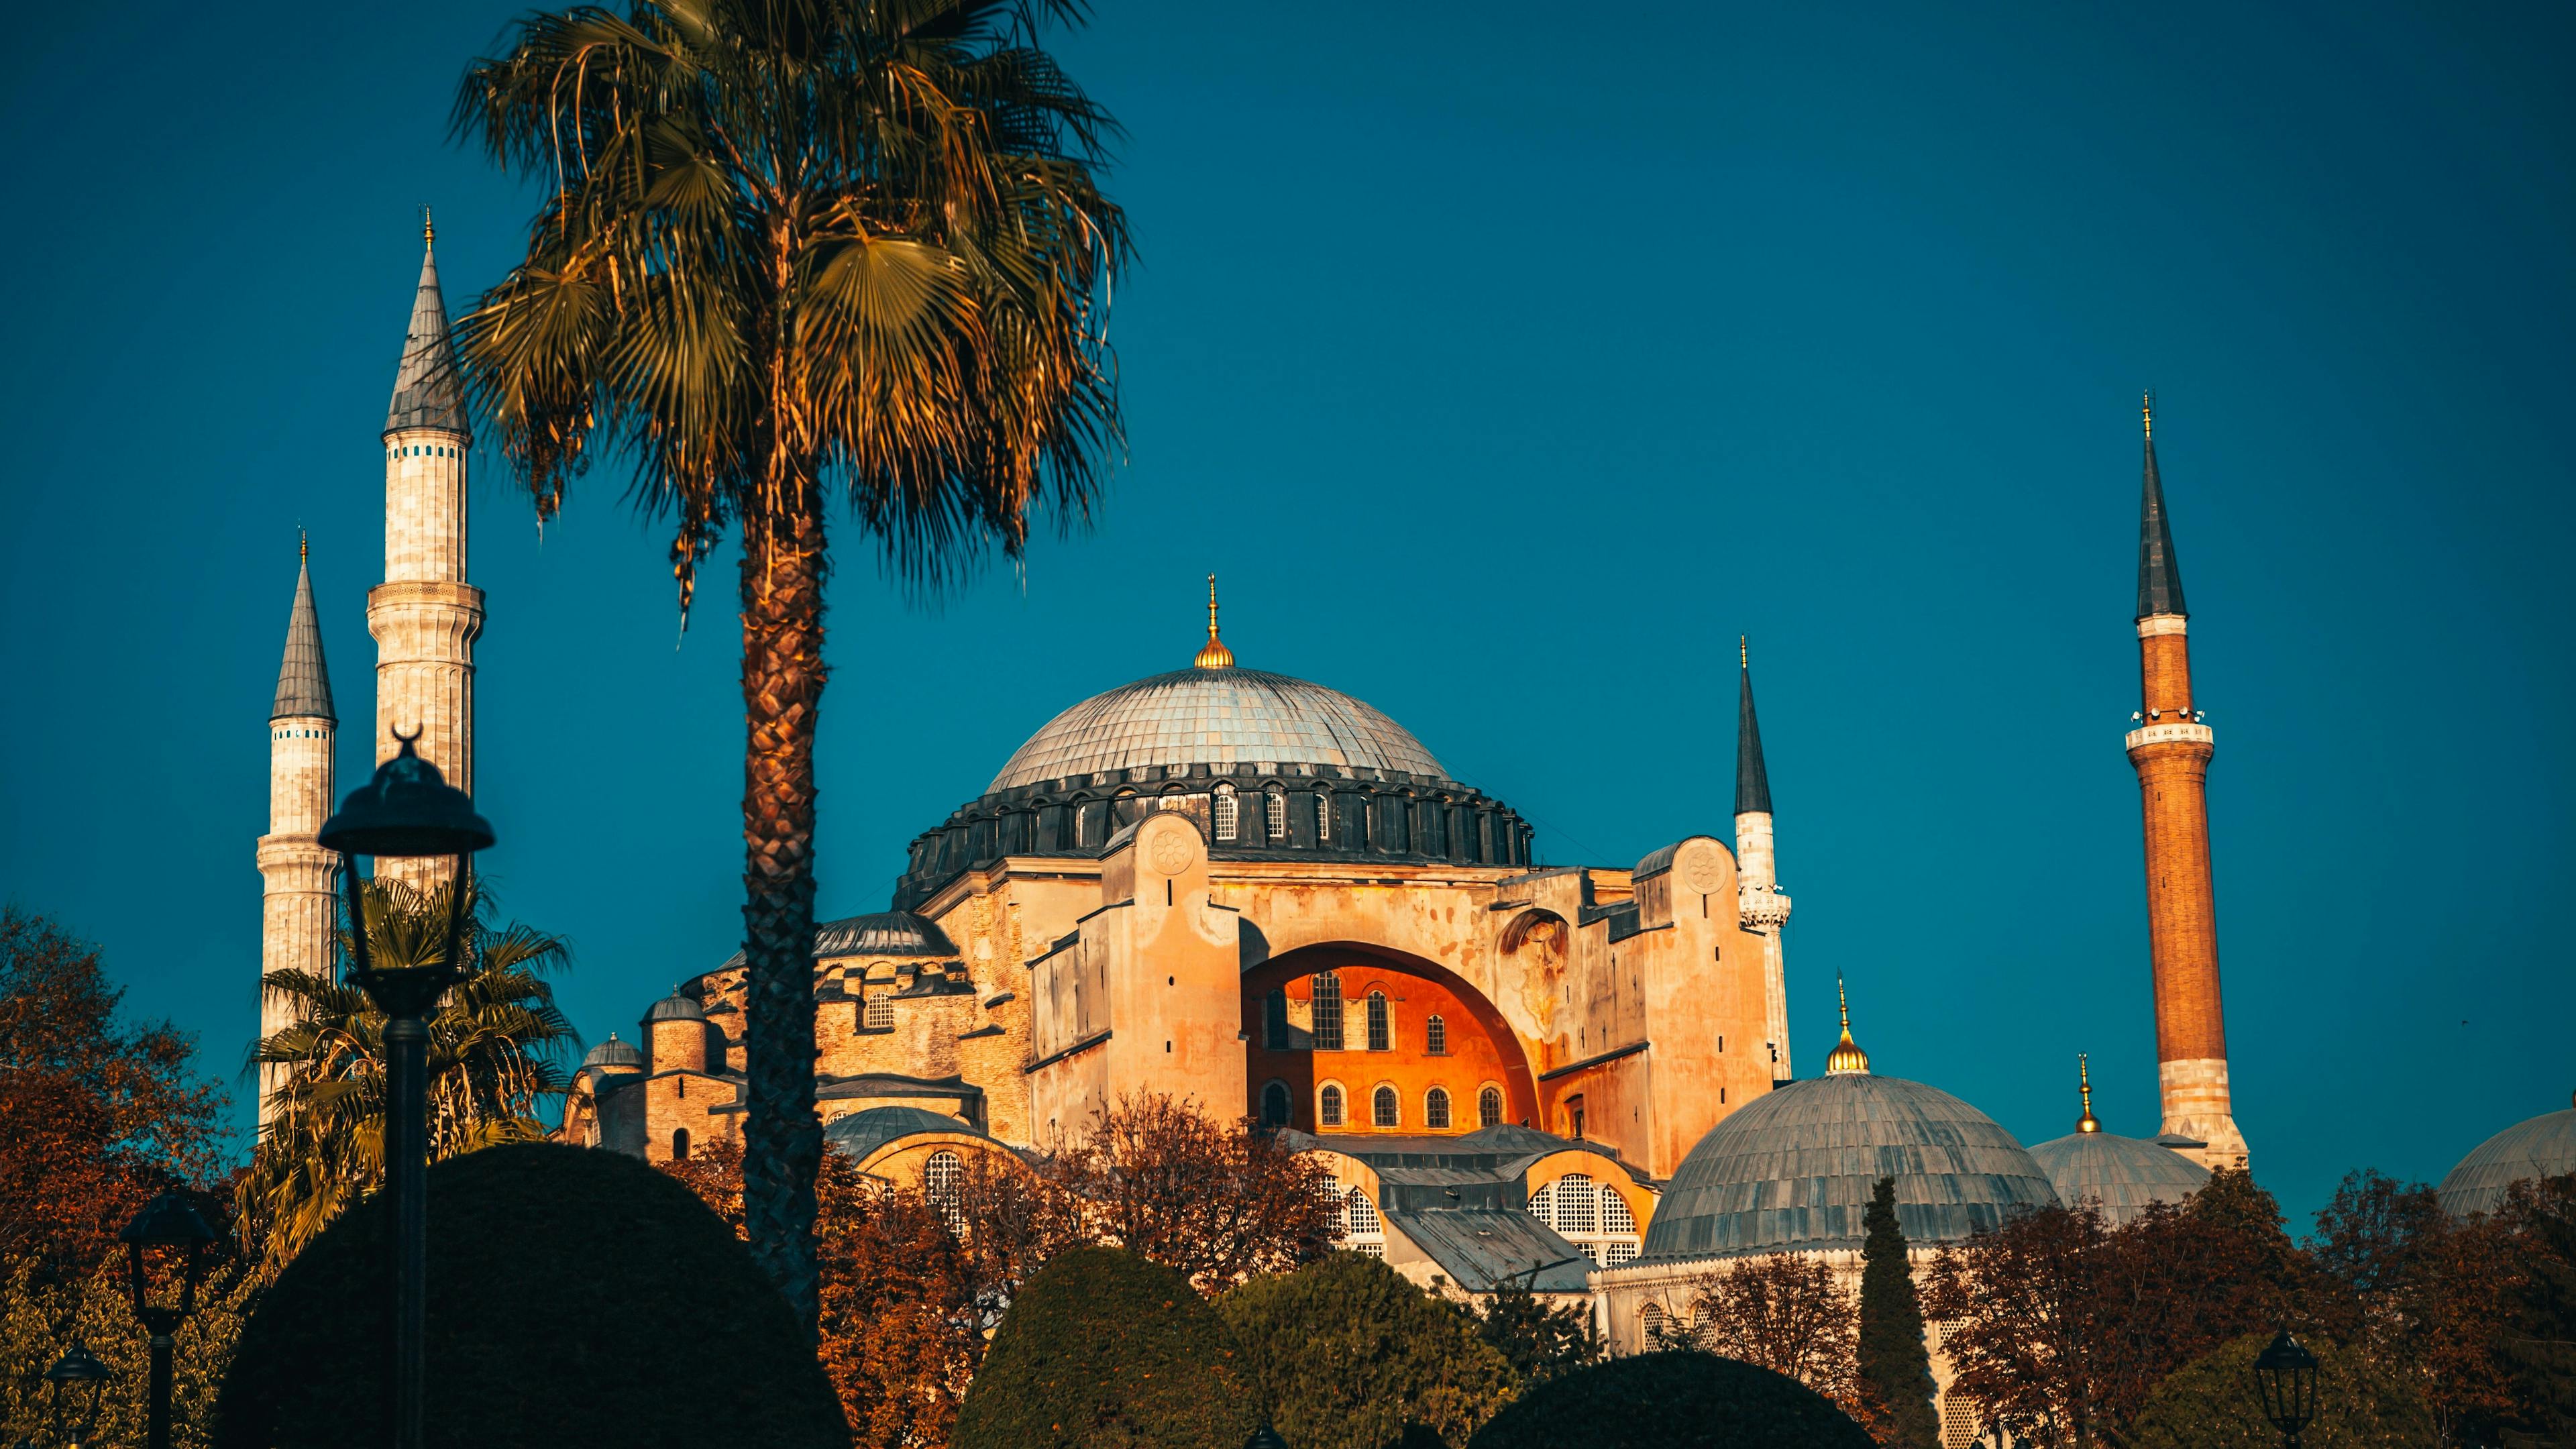 The Hagia Sophia on a hill next to a palm tree on a clear day in Istanbul.